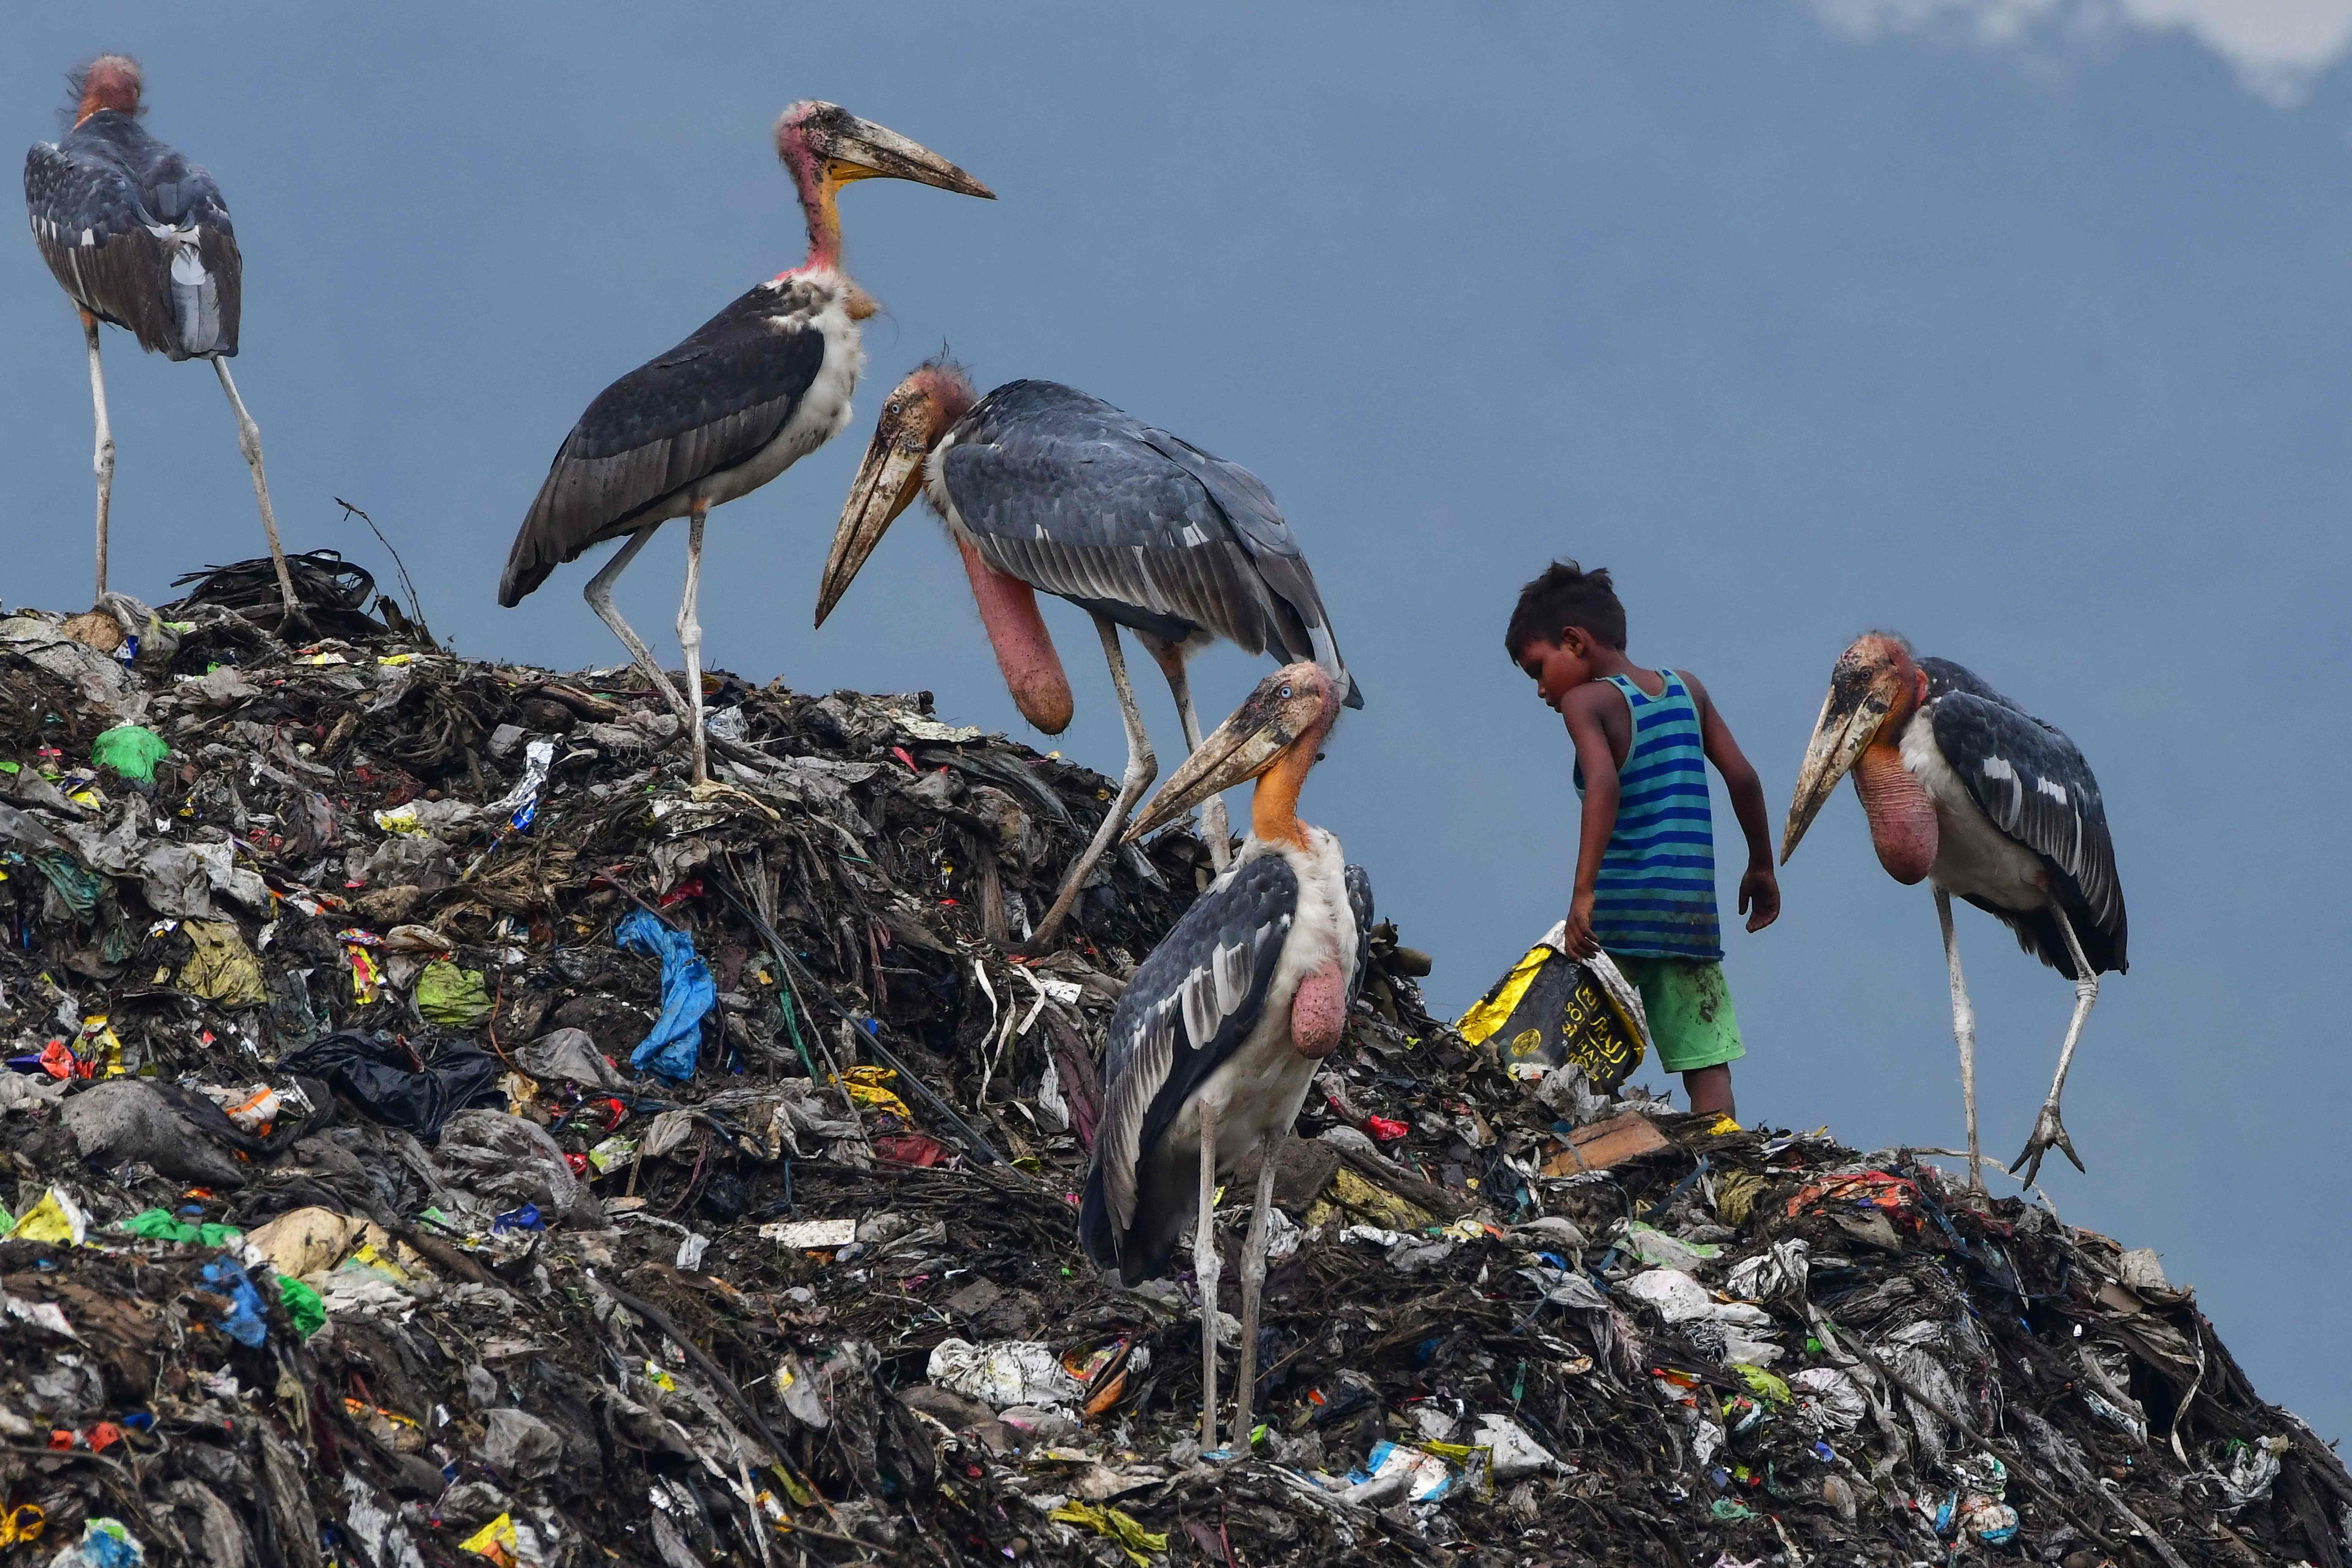 A boy searches for recyclable materials next to greater adjutant storks at a rubbish dump in Guwahati on 4 June 2022